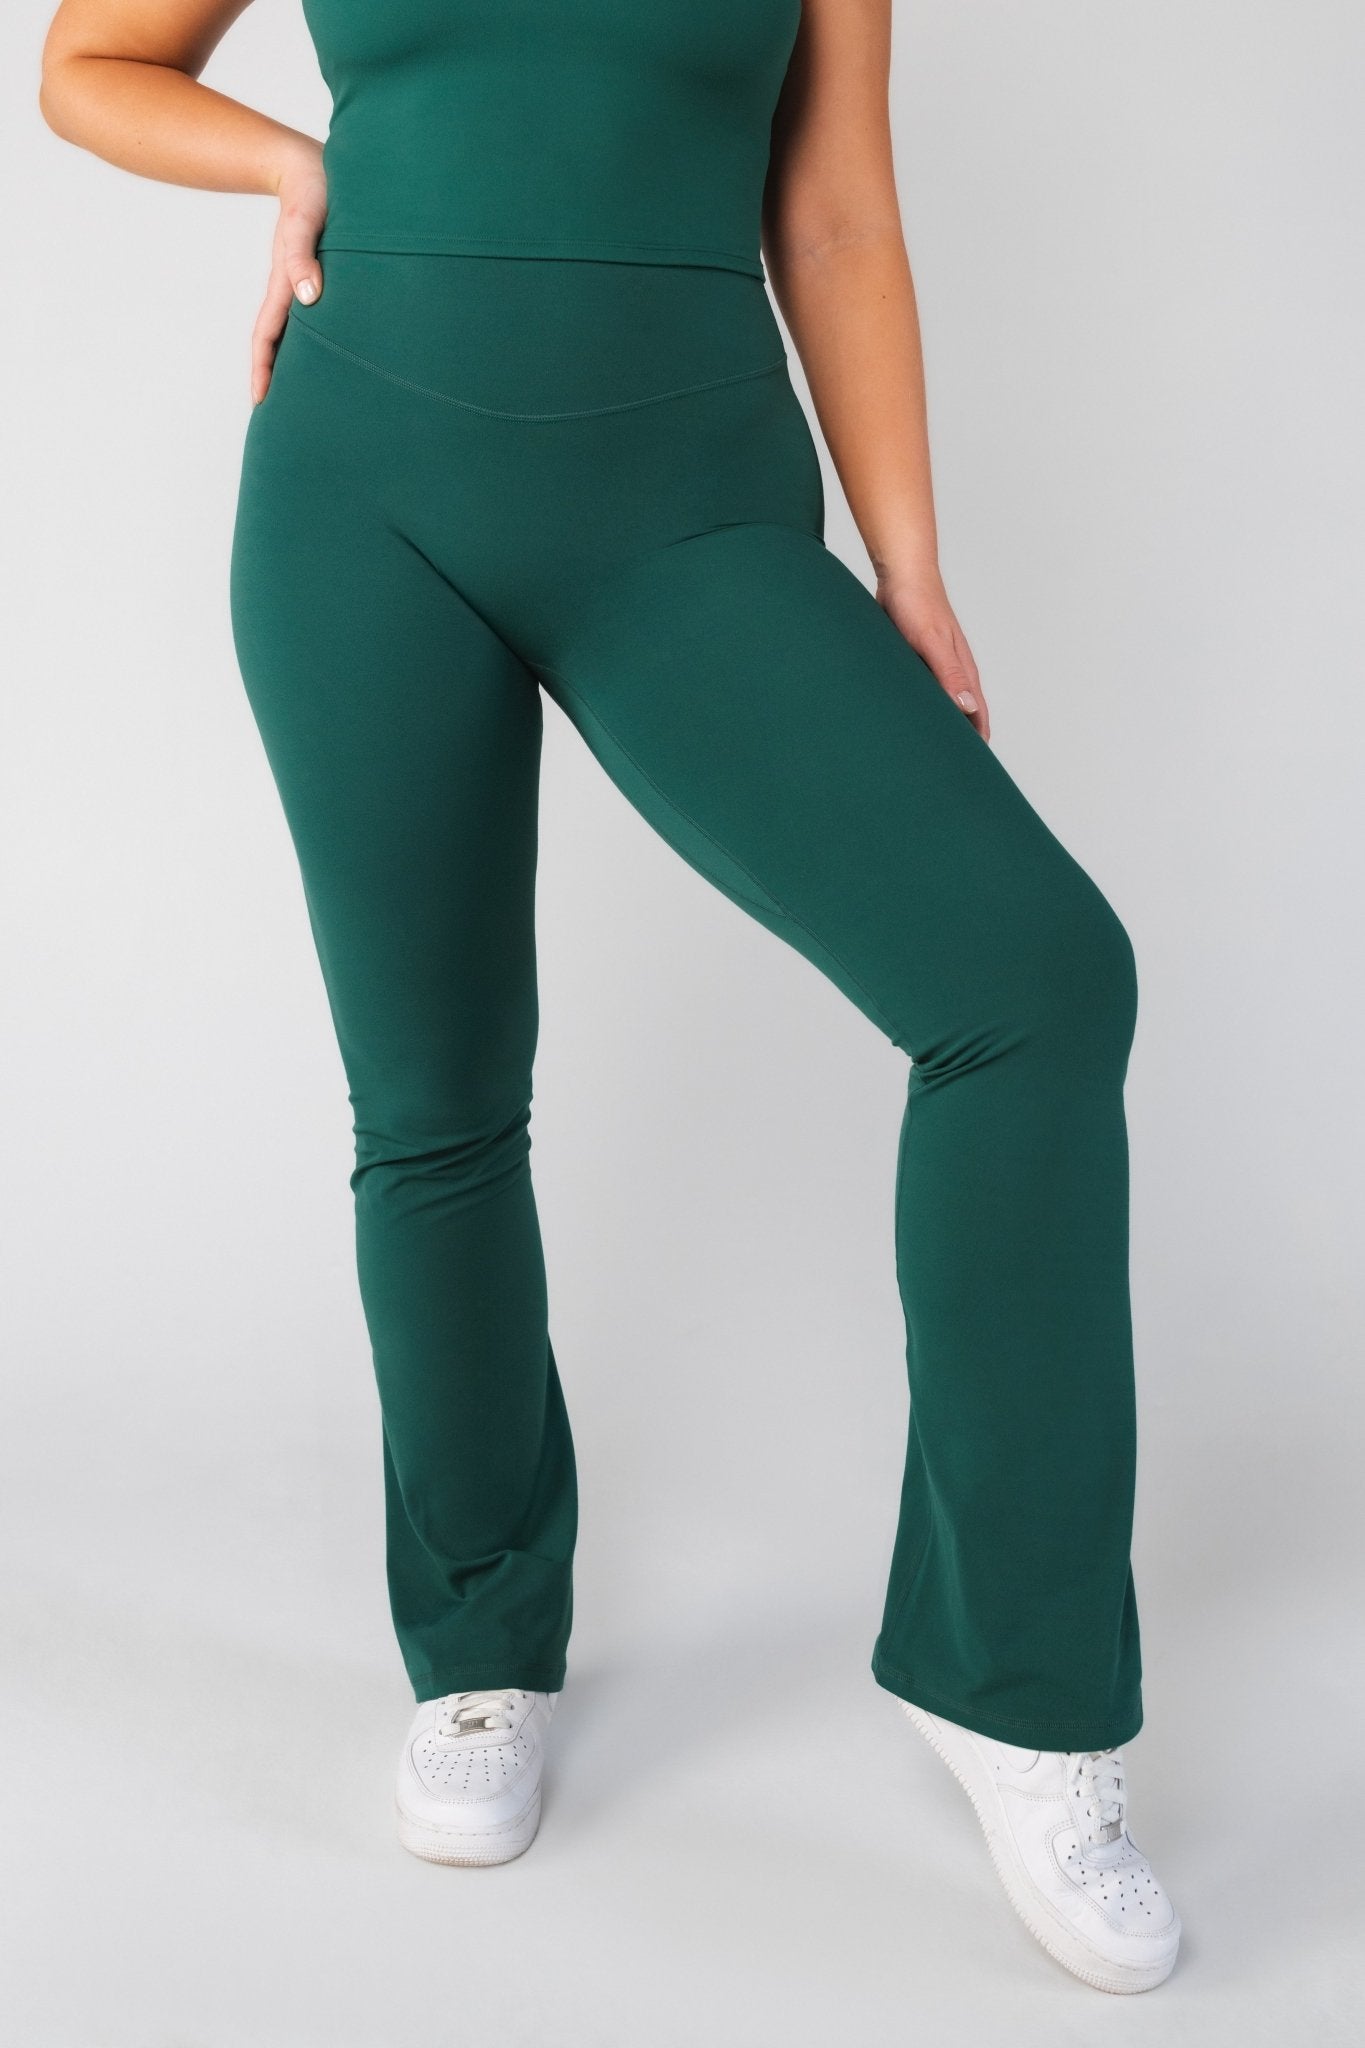 Cloud II Trouser - Evergreen, Women's Bottoms from Vitality Athletic and Athleisure Wear